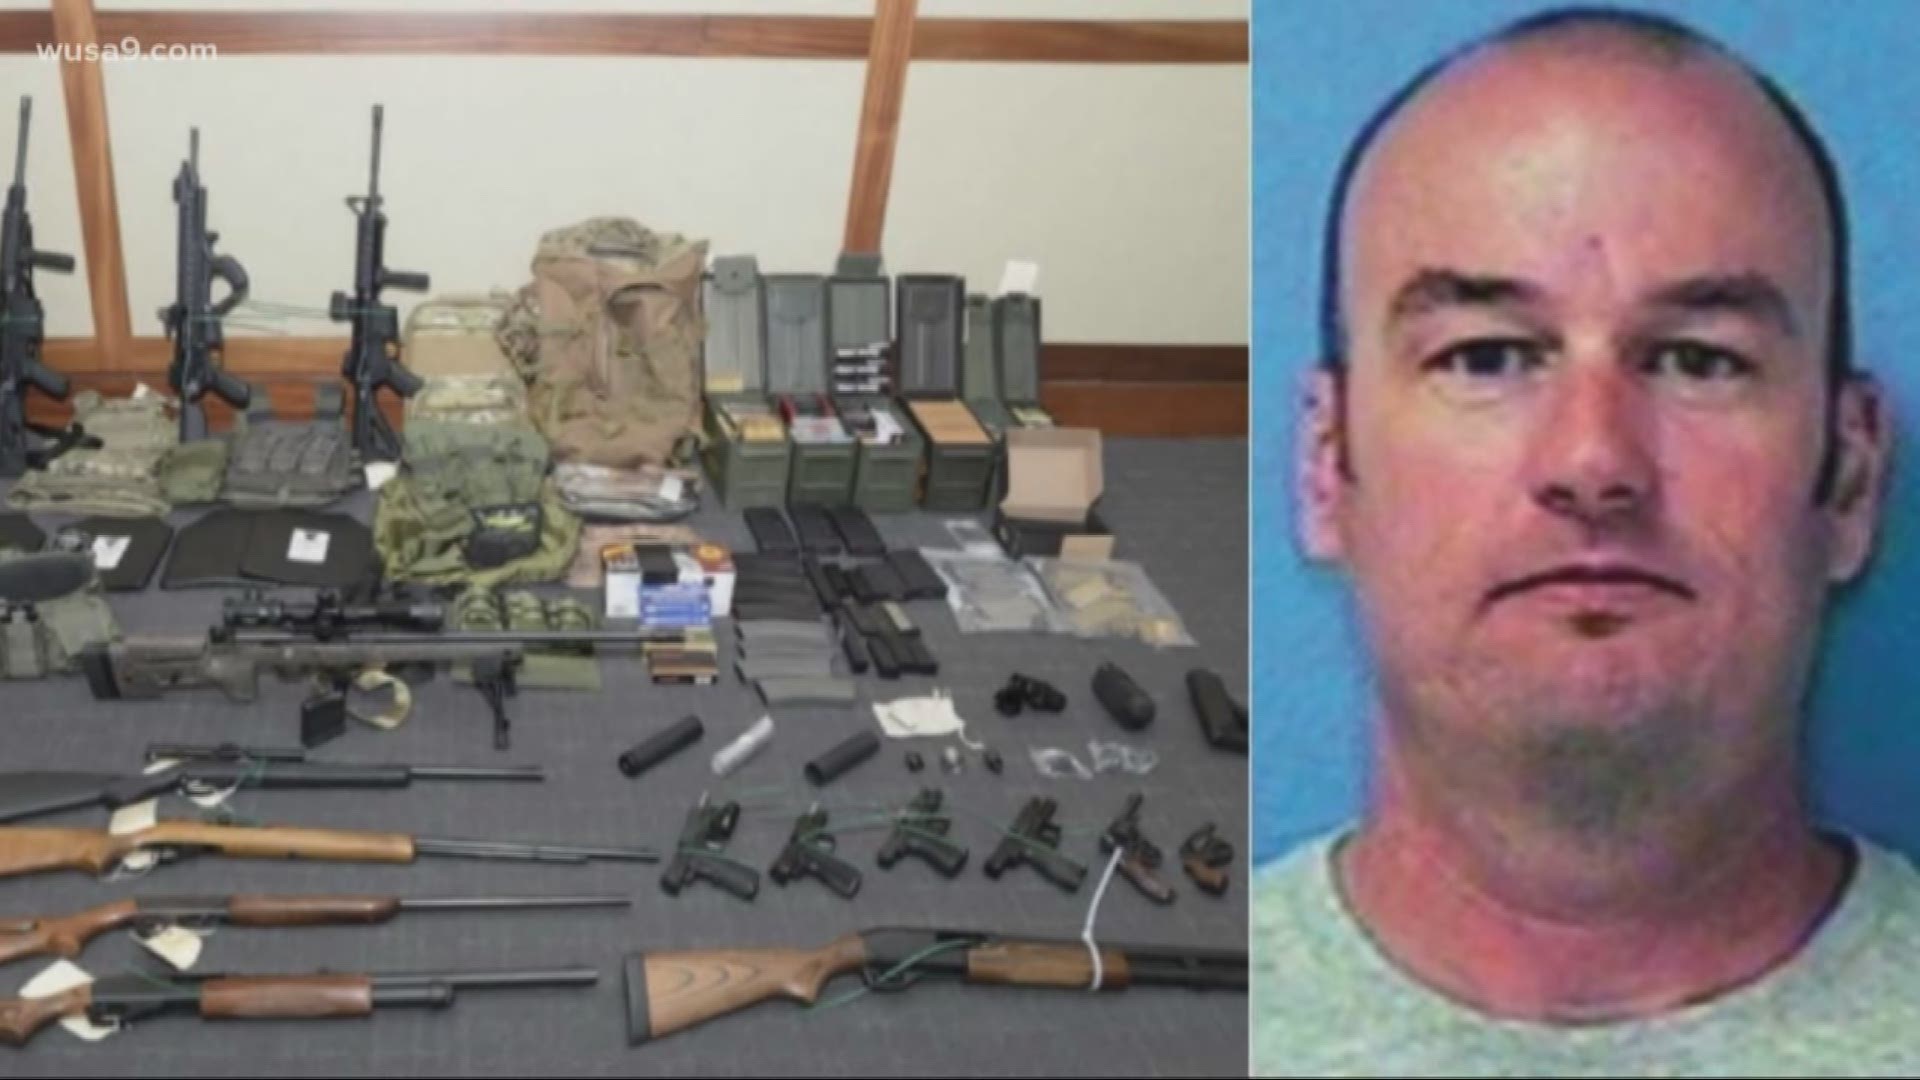 A Montgomery County man accused of planning a terror attack wants most of his charges dropped.
Coast Guard Lieutenant Christopher Hasson. The FBI says he wanted to kill innocent people...
His former neighbors want him to stay in jail.